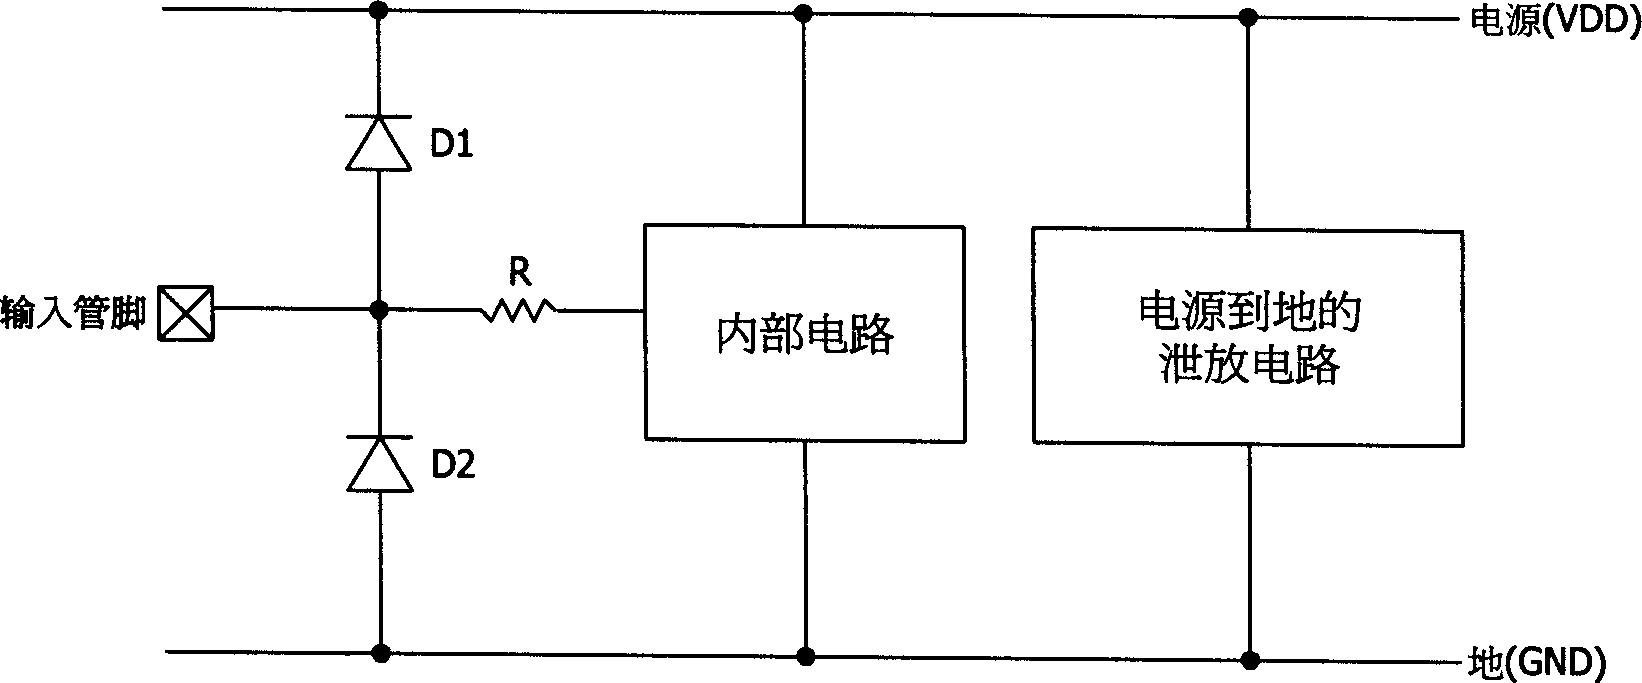 Static electricity protection method of analog signal input pin with common mode electrical level as its lowest electric potential